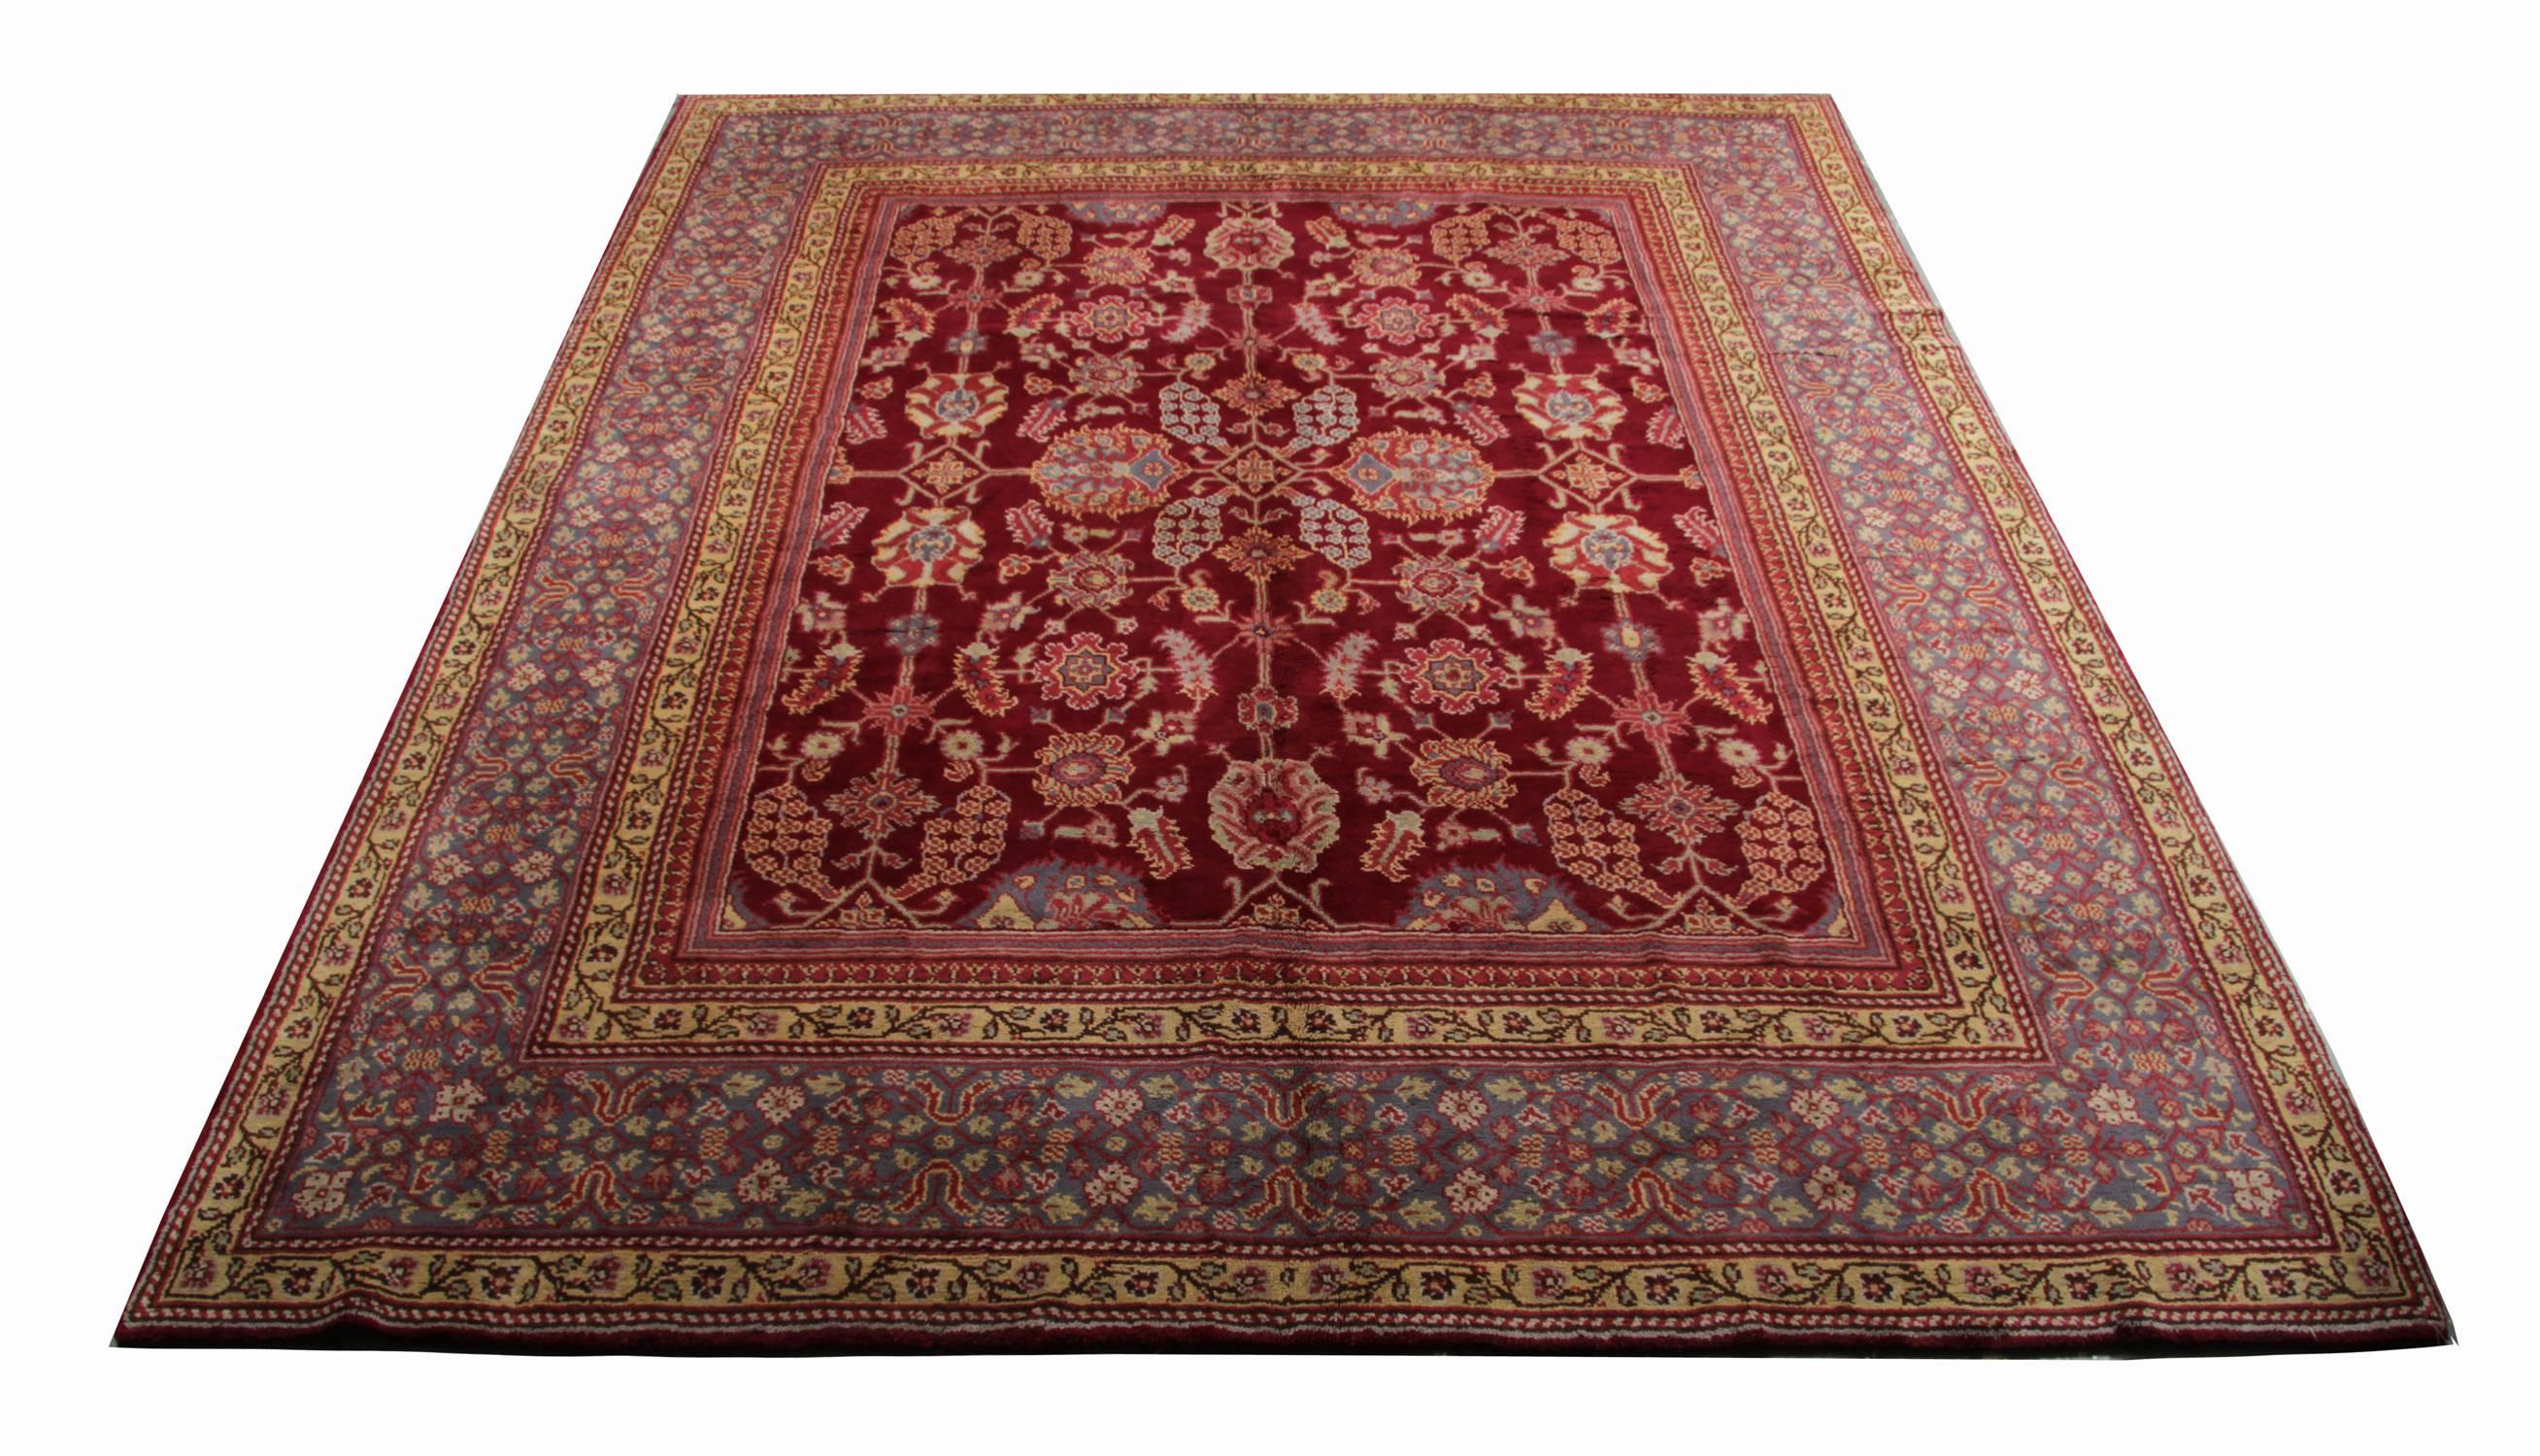 Antique English Axminster handmade carpet is very famous as English designer rug in excellent condition, circa 1880s.
This red rug is traditional patterned rugs has a most elegant design with attractive color combinations. And is an excellent idea